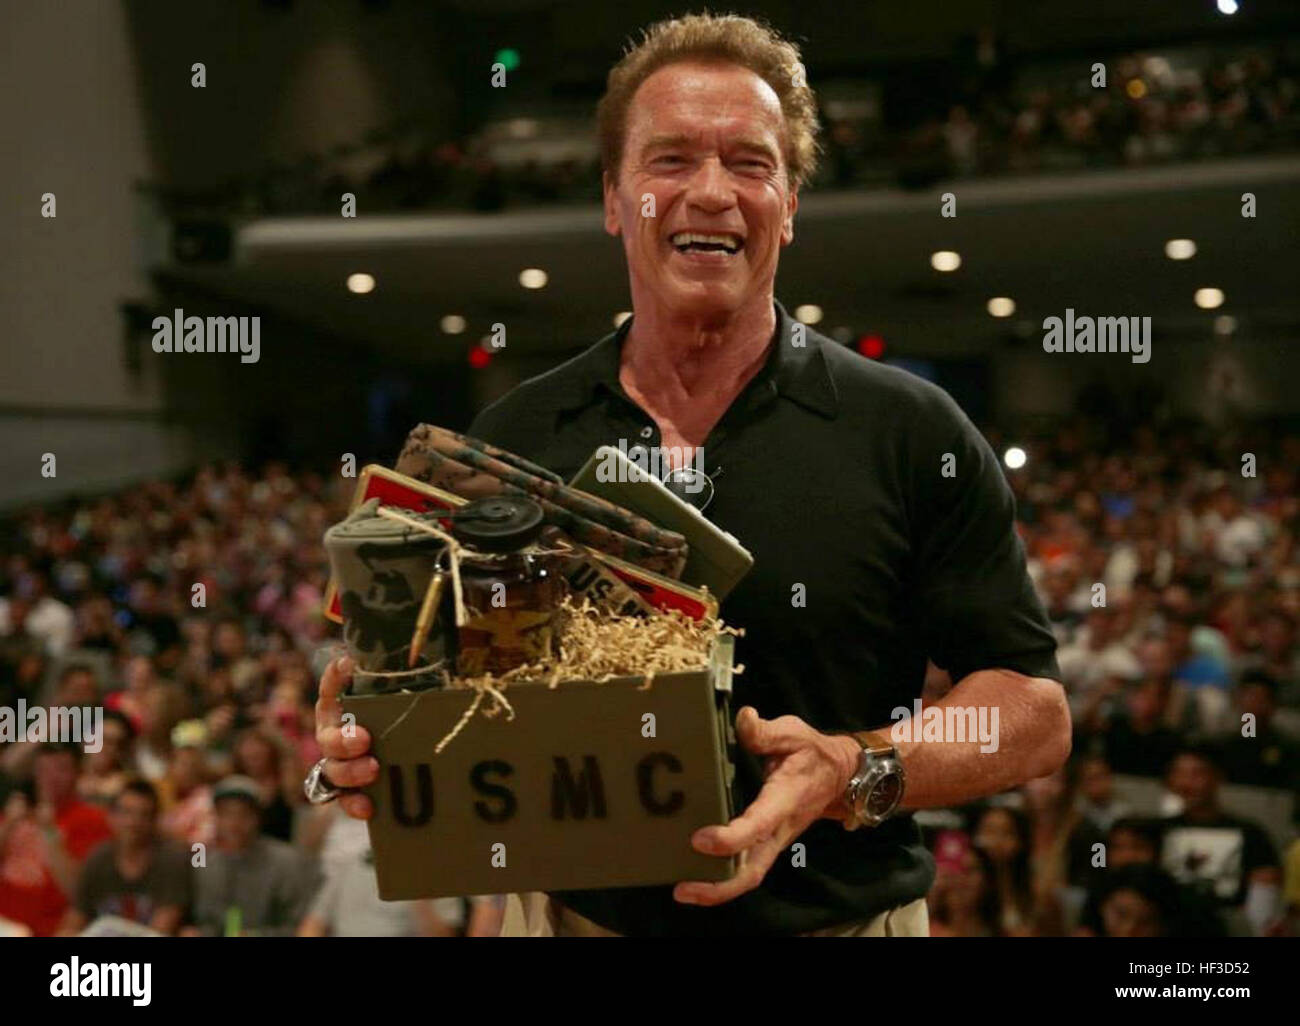 Arnold Schwarzenegger visited the Camp Pendleton Base Theater during a screening of the movie Terminator Genisys, June 14. Schwarzenegger, former Mr. Olympia and Governor of California, is an Austrian-born, Golden Globe and Emmy Award winning actor who has starred in more than 50 movies such as 'The Terminator,' 'Conan the Barbarian' and 'The Expendables.' 2002197 Arnold Schwarzenegger visited the Camp Pendleton Base Theater 2015 Stock Photo